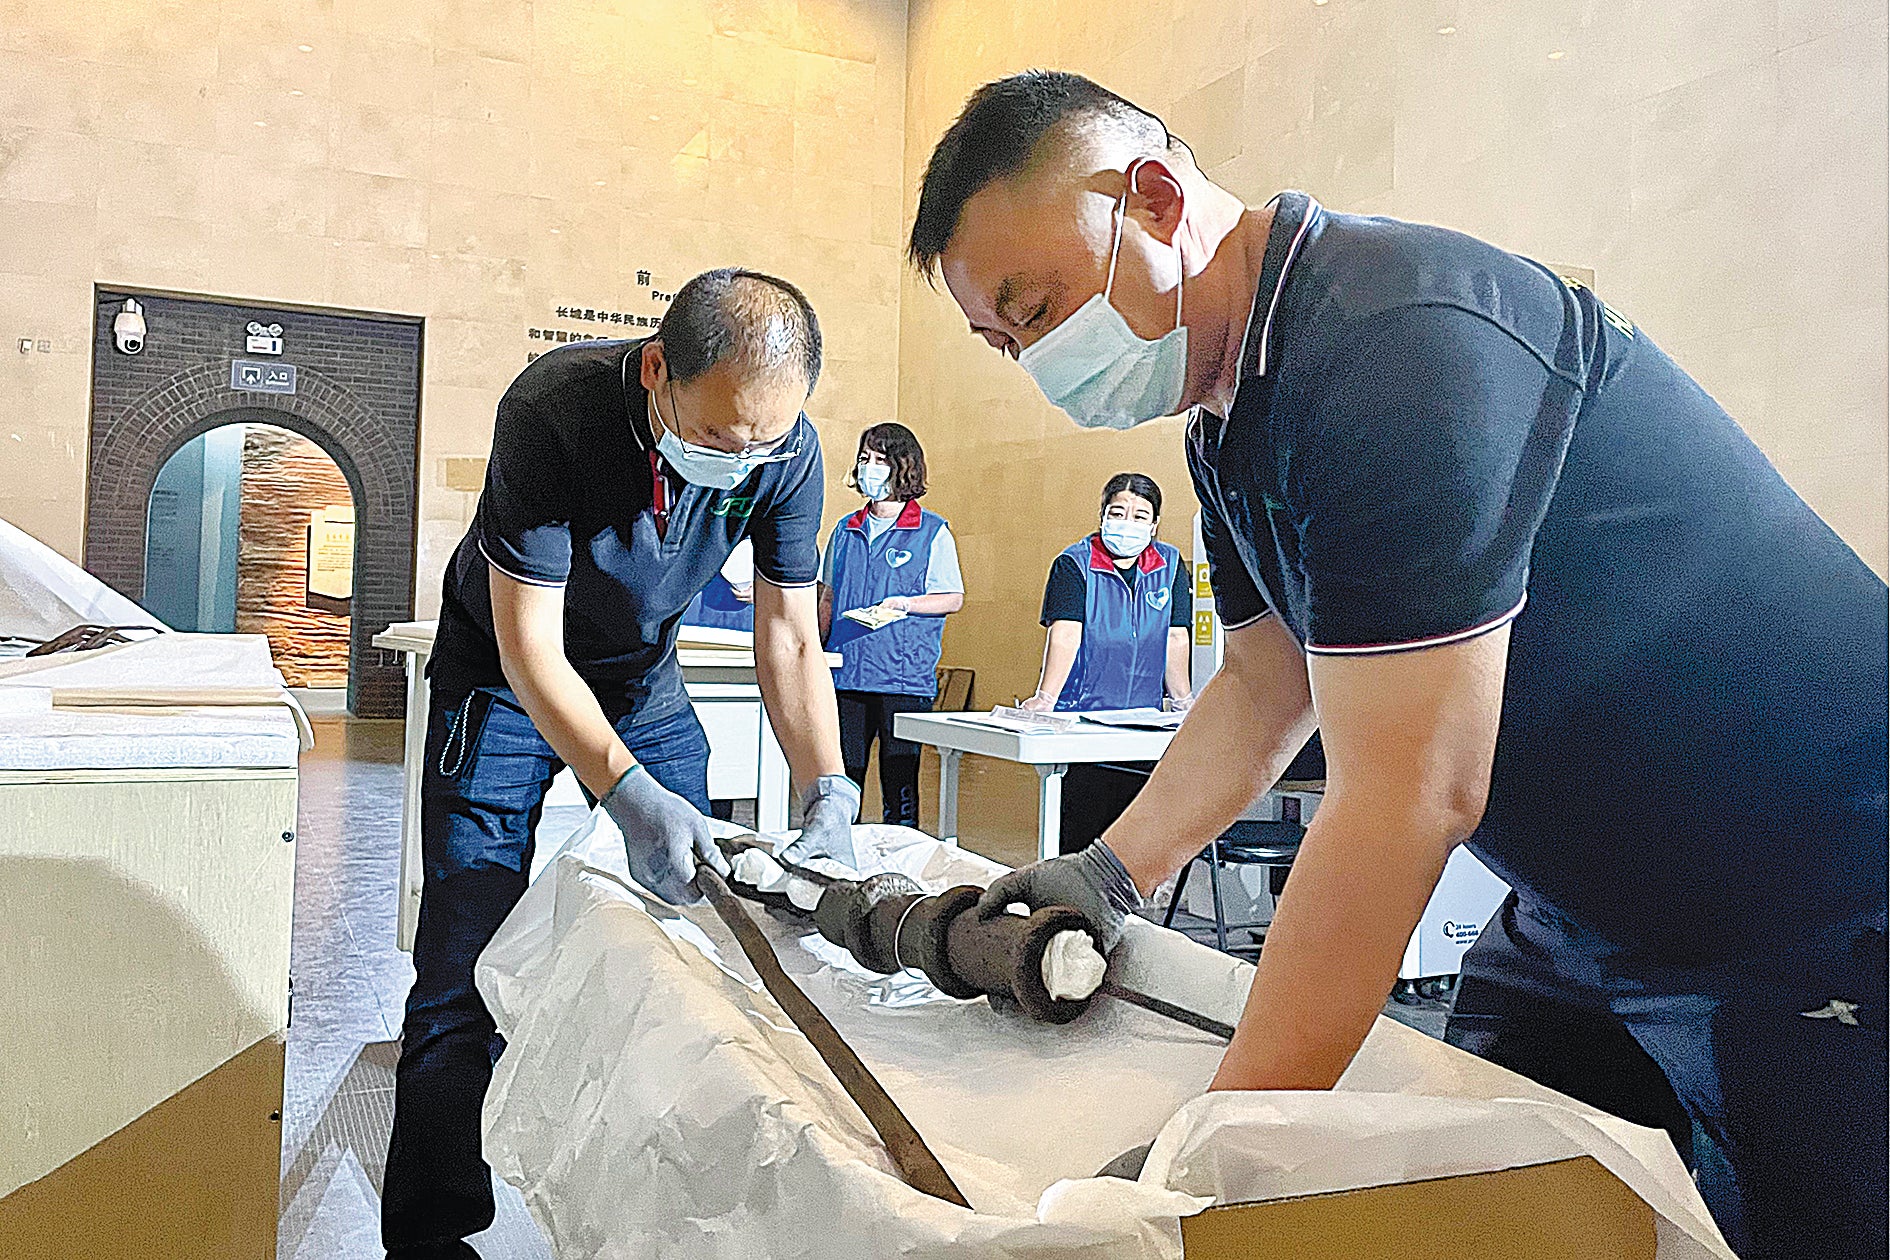 Staff of the China Great Wall Museum pack exhibits before the start of renovation work